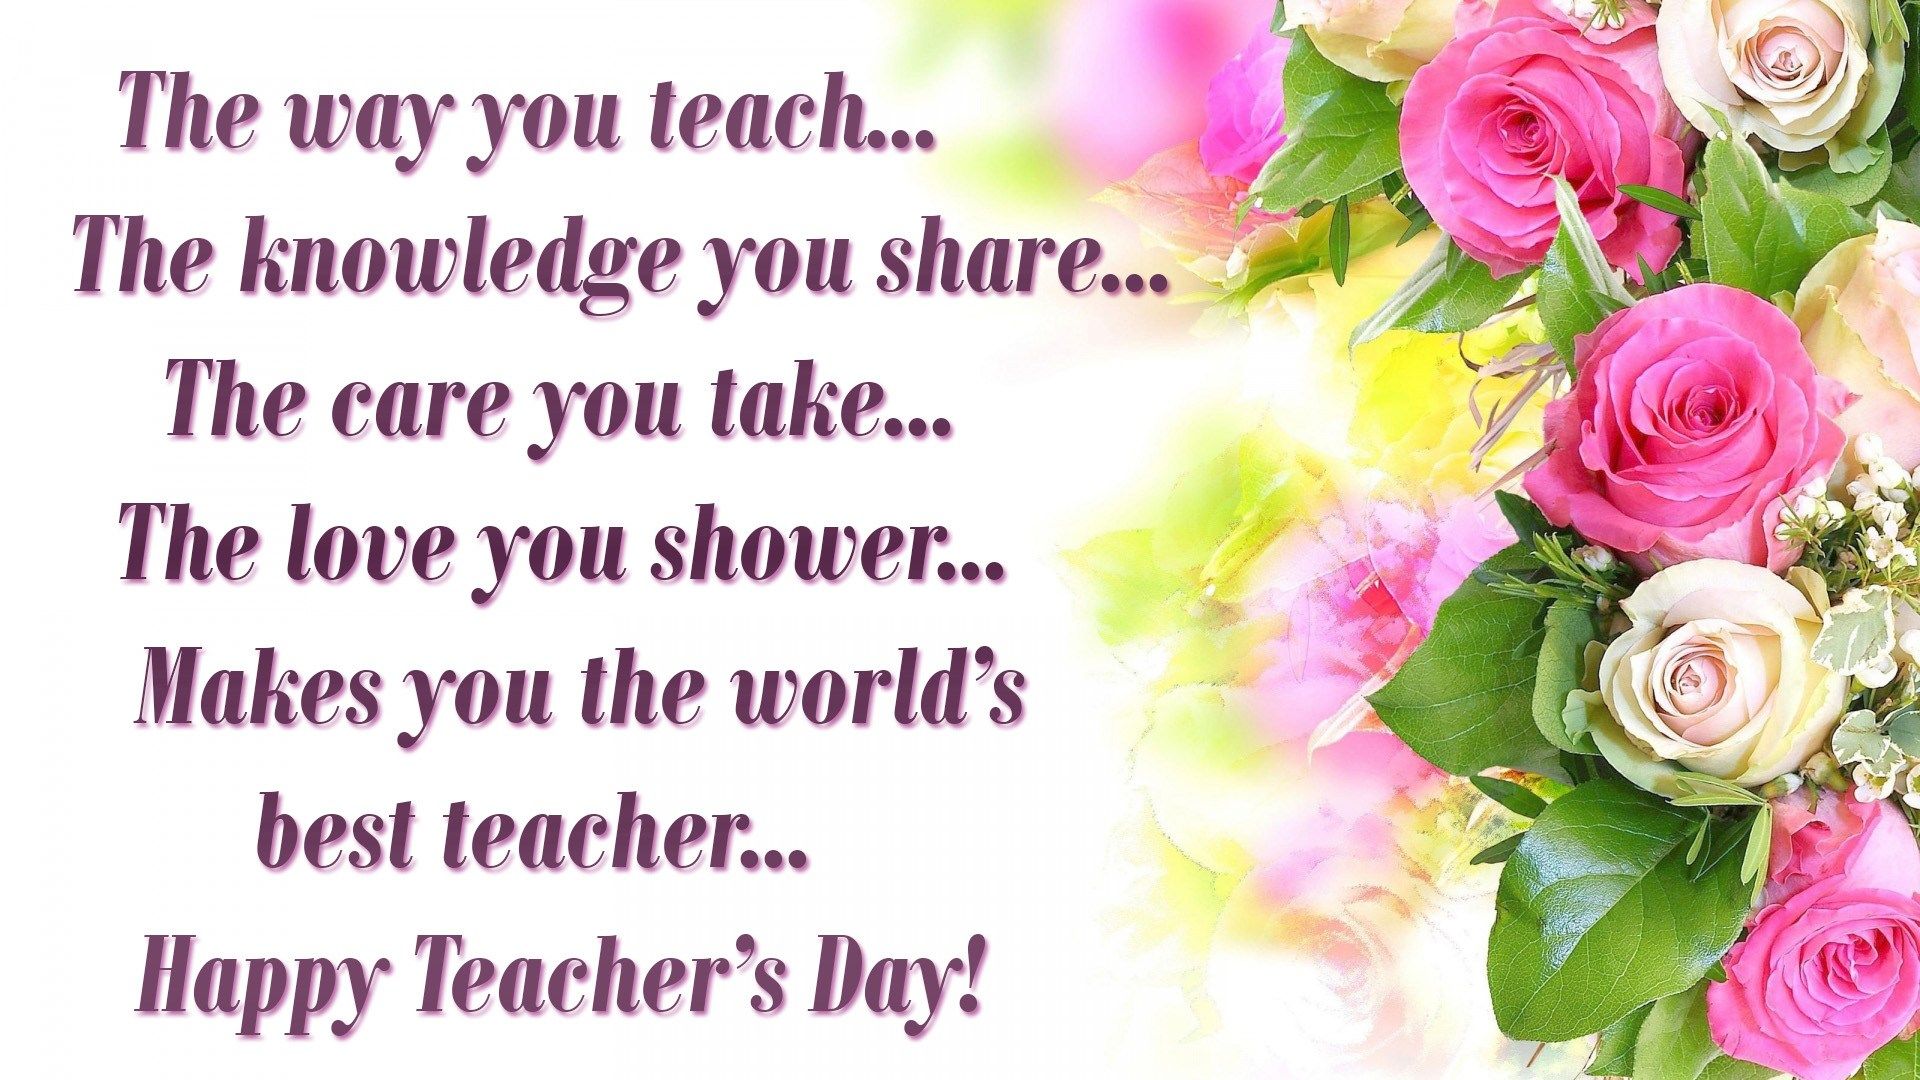 Happy Teachers Day Wishes 2018 Image Teacher Day Wishes Download Wallpaper